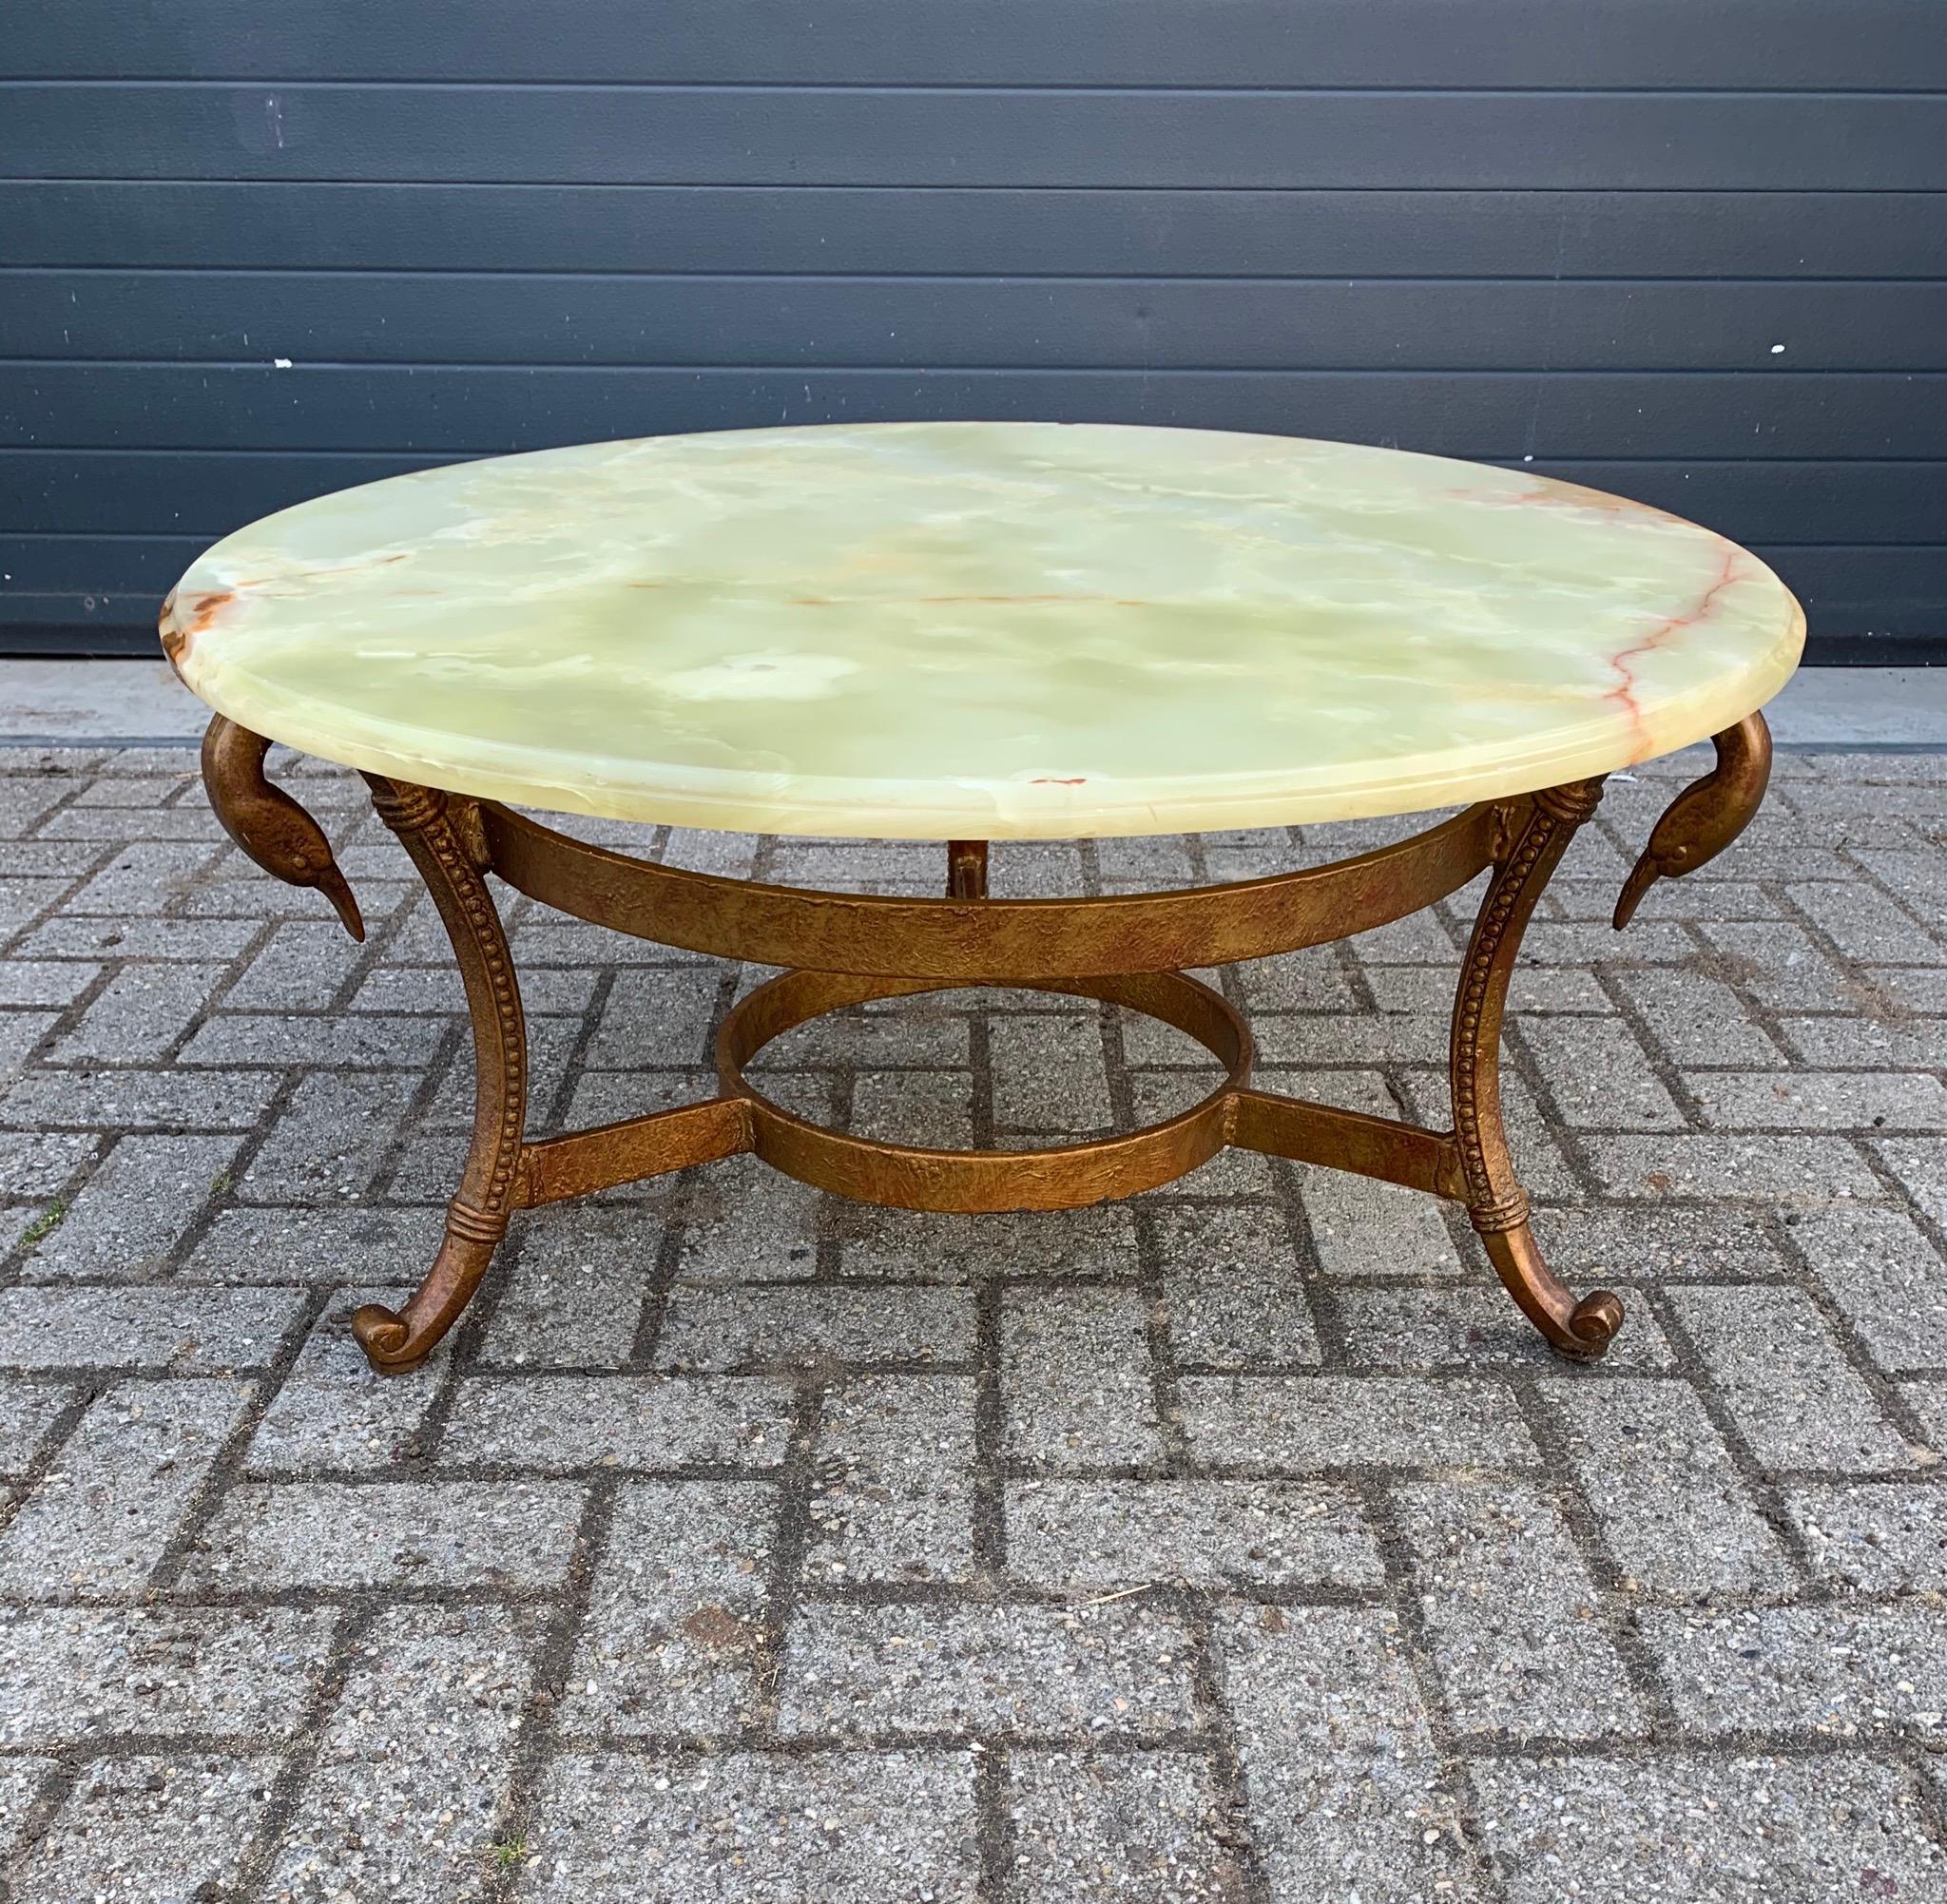 Midcentury Empire Revival Coffee Table with Onyx Top and Stylish Swan Sculptures For Sale 8